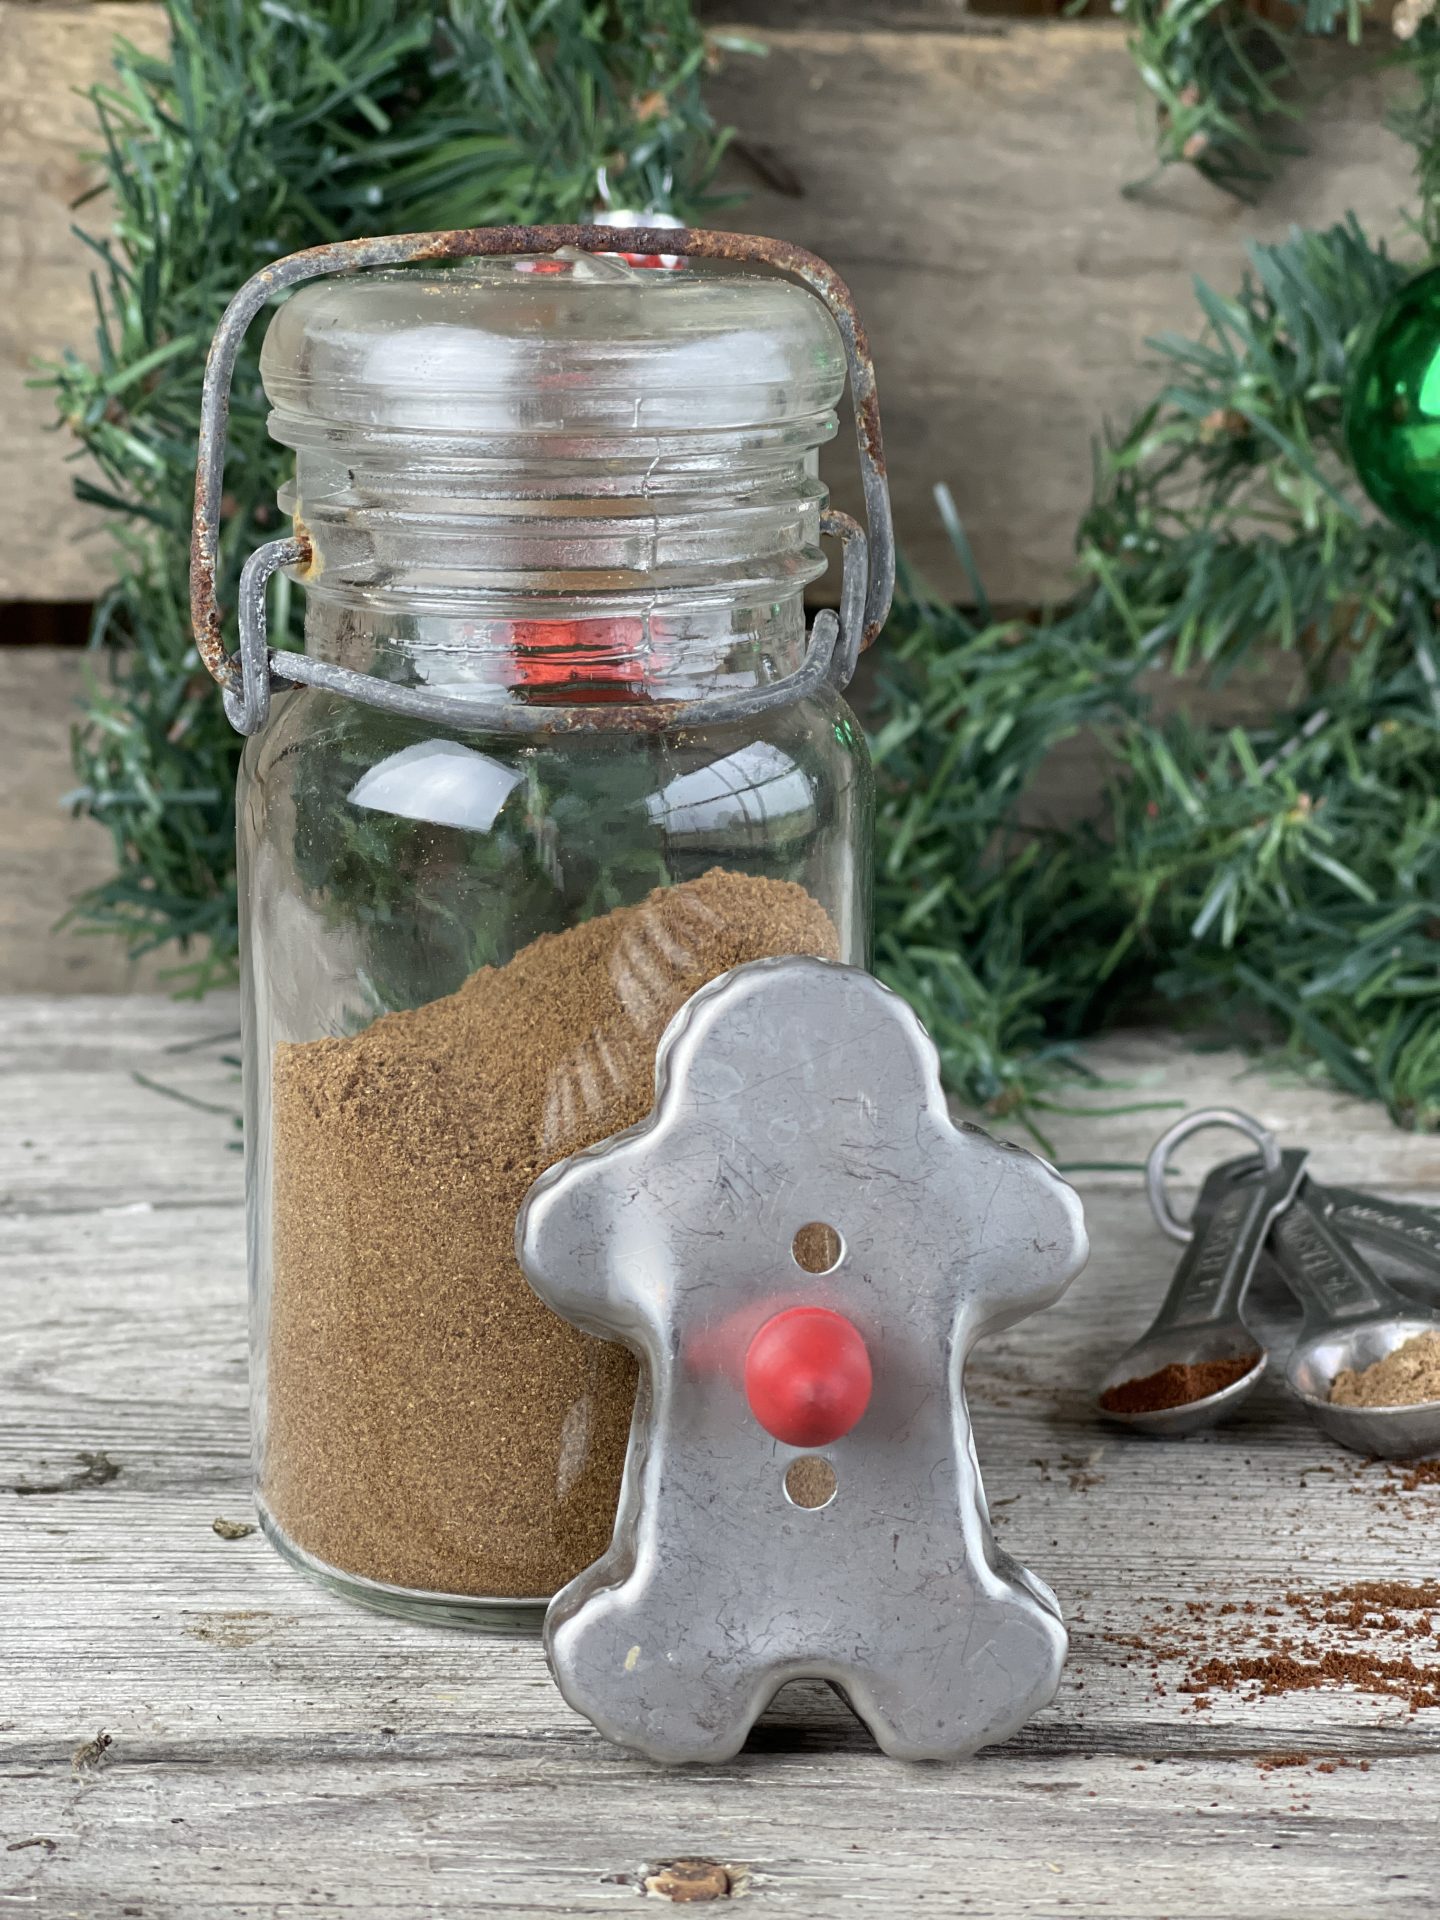 Homemade Gingerbread Spice Mix from Farmwife Feeds is a holiday must, a mix of 5 common spices for that Christmas holiday favorite! #spicemix #gingerbread